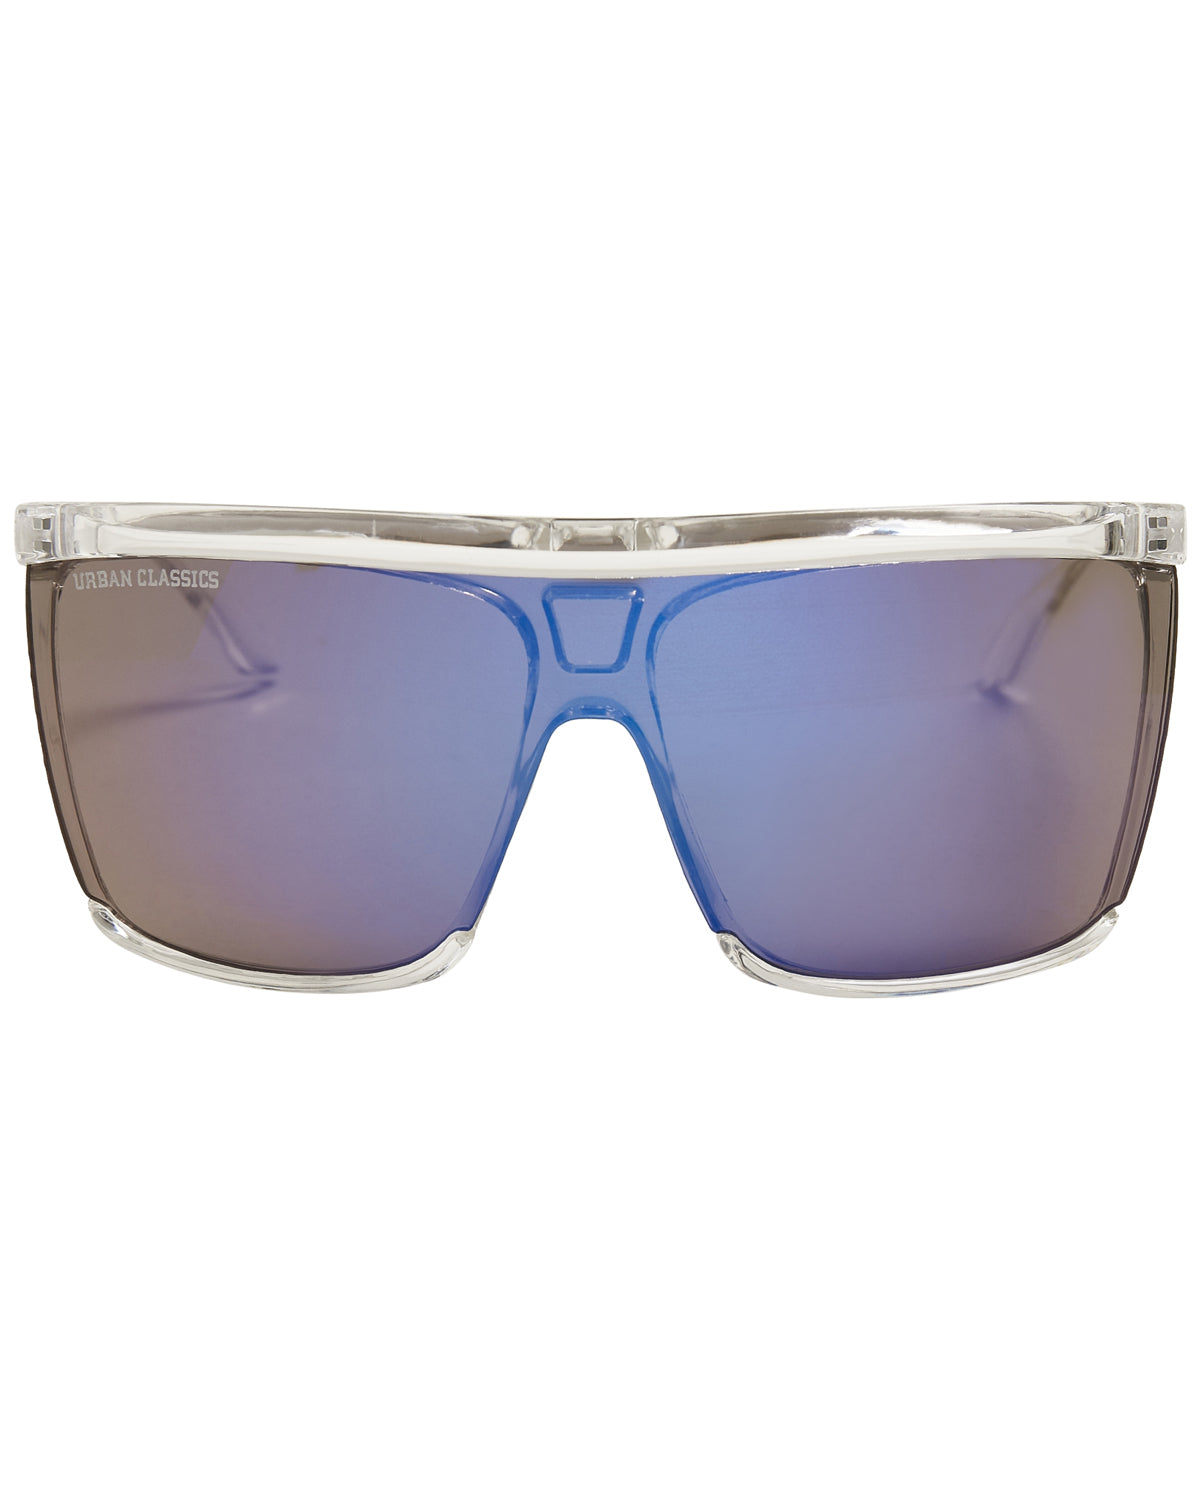 Men\'s sunglasses from domestic online store